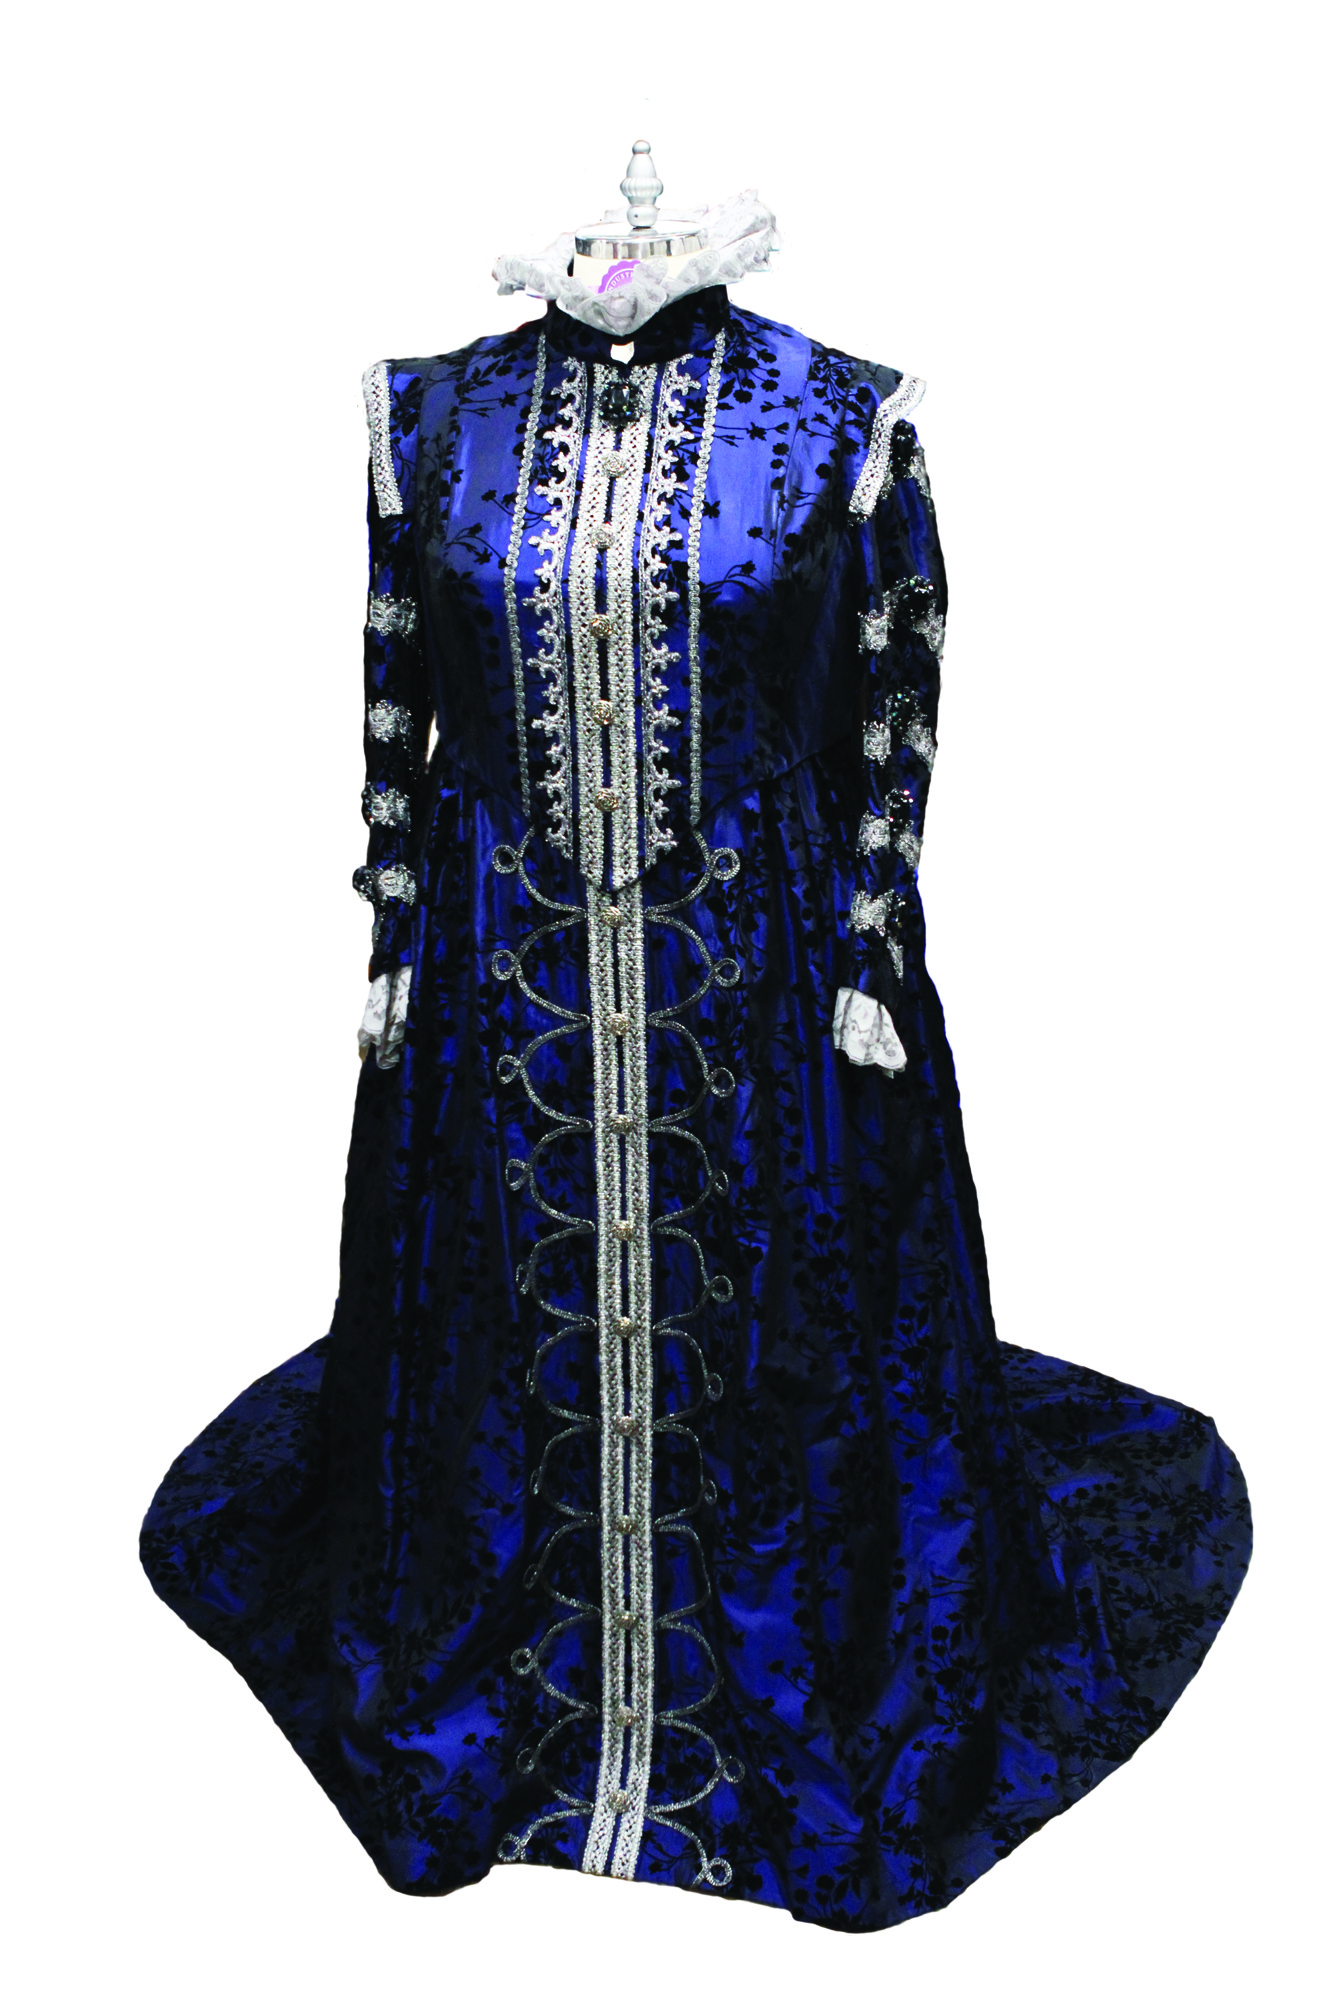 This costume for Elisabeth in Verdi’s “Don Carlos” was designed by Suzanne Mess, principal costume designer with the Canadian Opera Company. It has been used by the Arizona Opera, the Hawaii Opera Theatre and the Sarasota Opera.